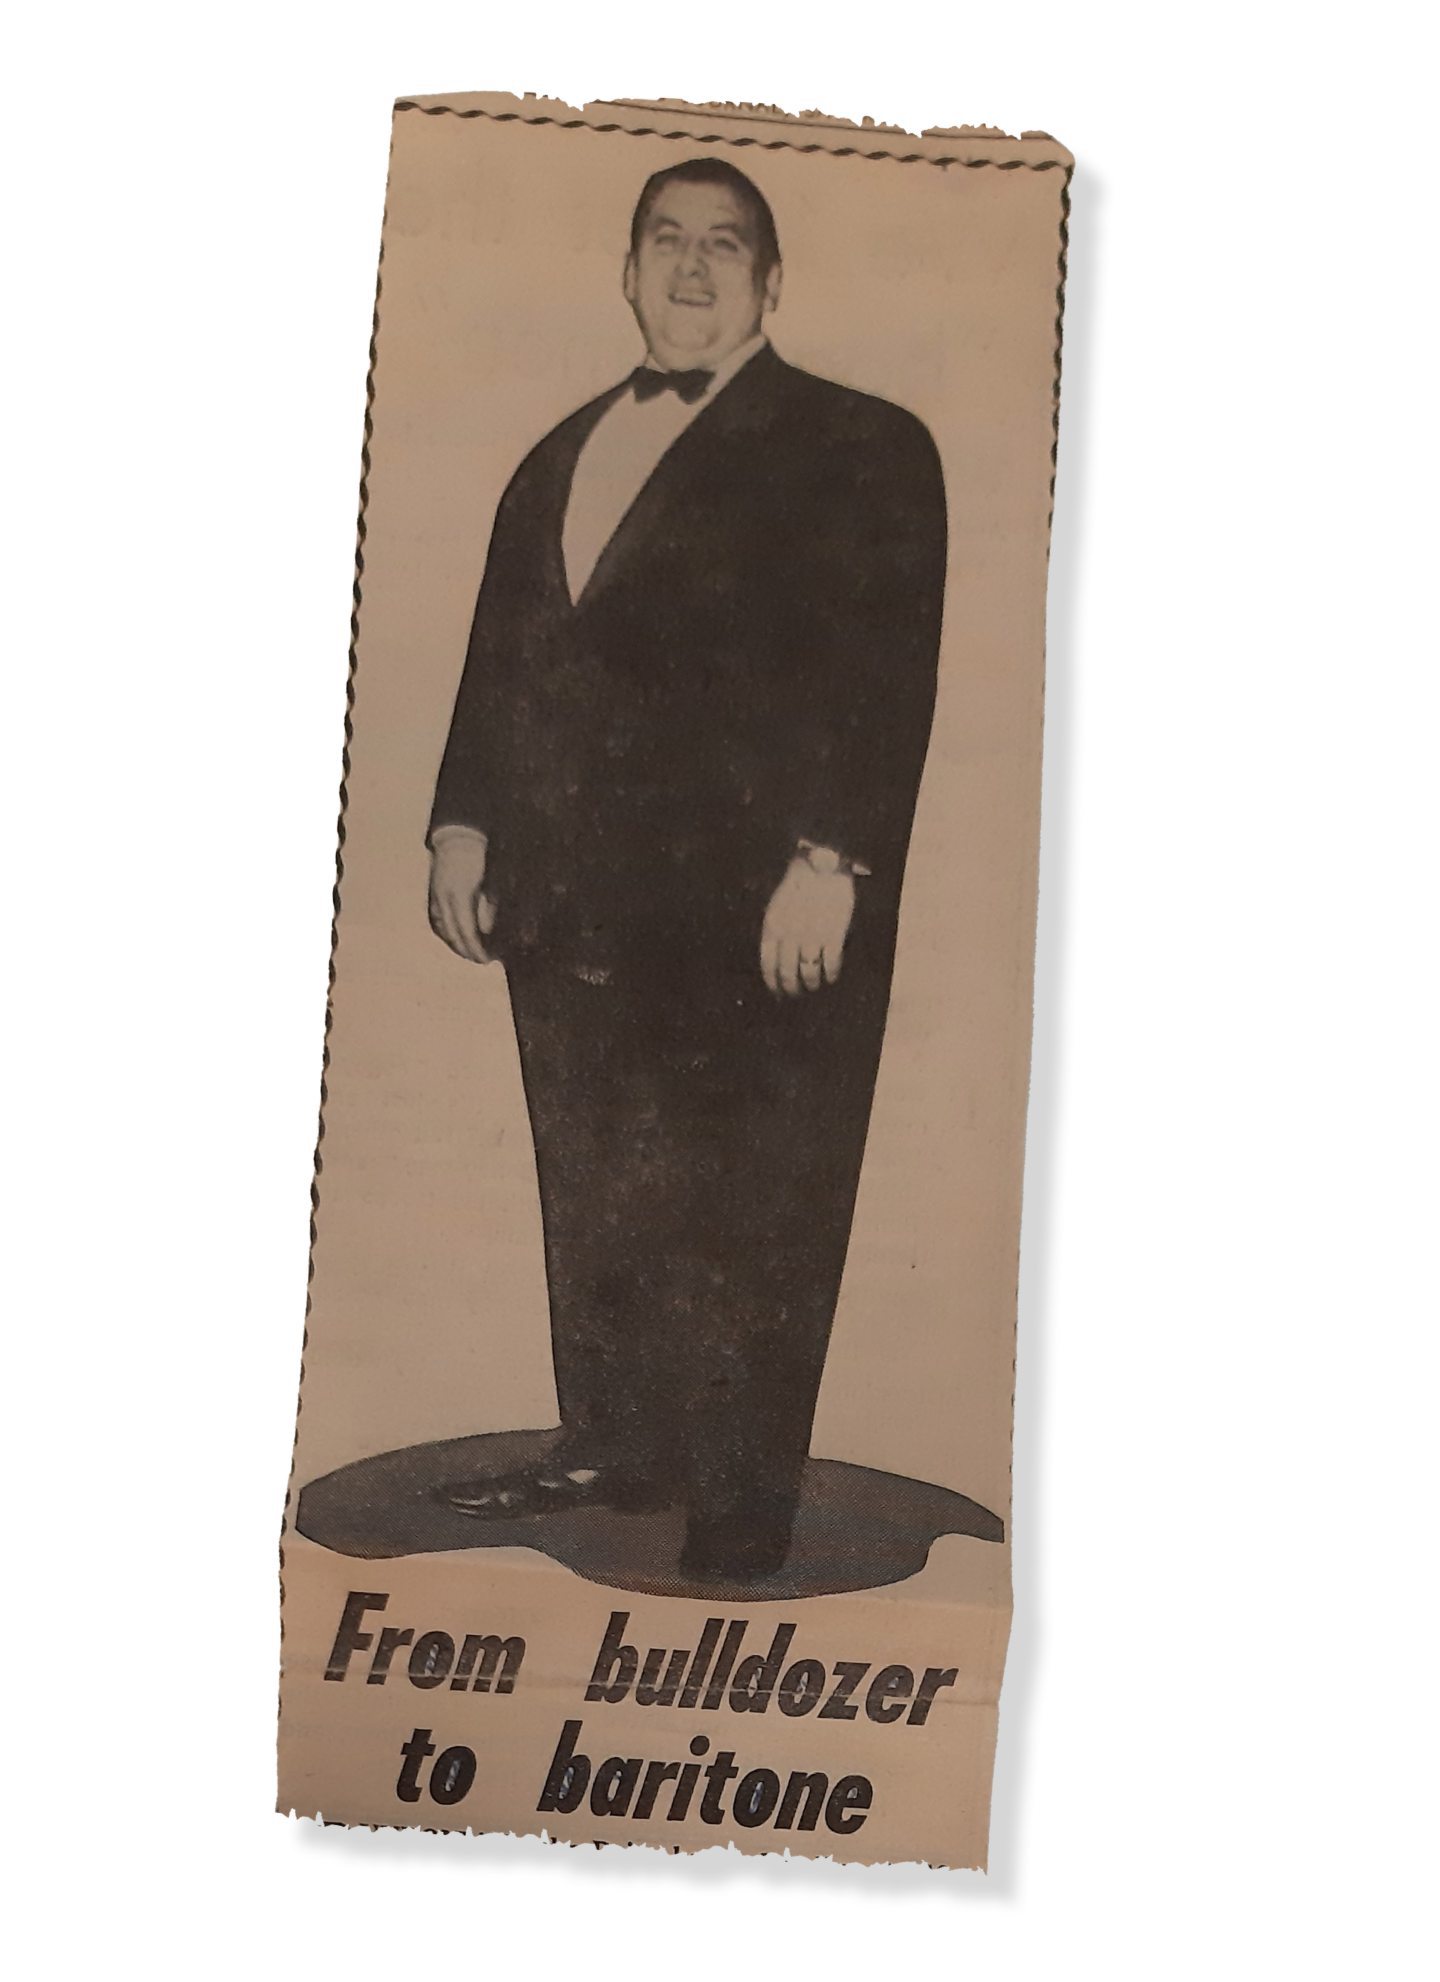 Dair, pictured in a newspaper clipping, made headlines in 1971. He is pictured in a suit with the caption reading: from bulldozer to baritone